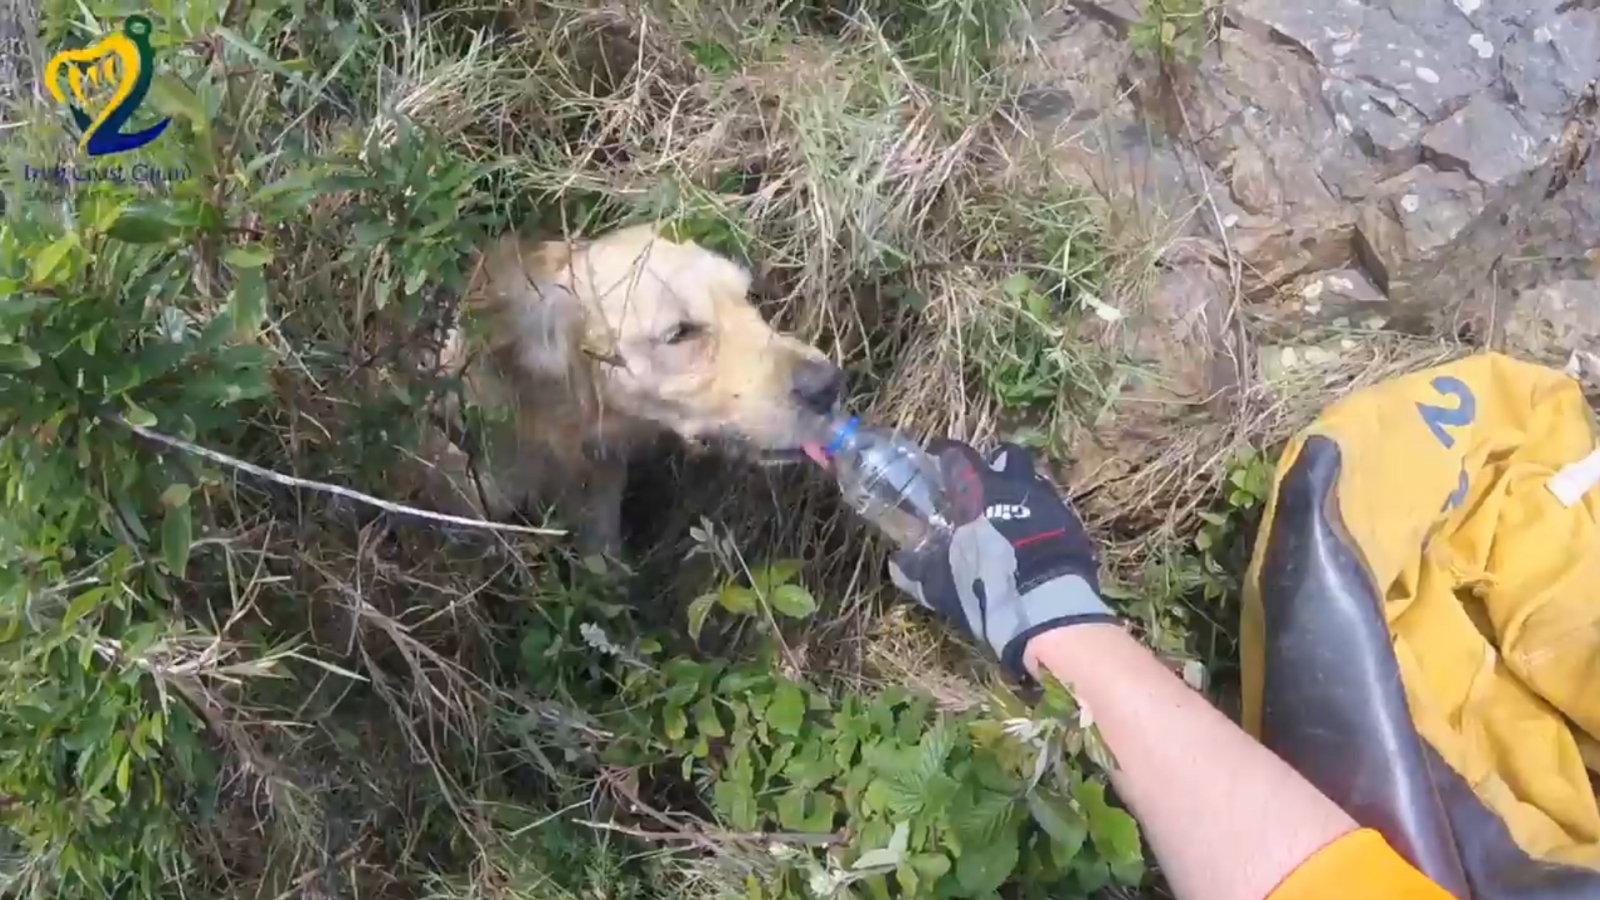 Watch stranded dog get rescued after falling down 15ft cliff face